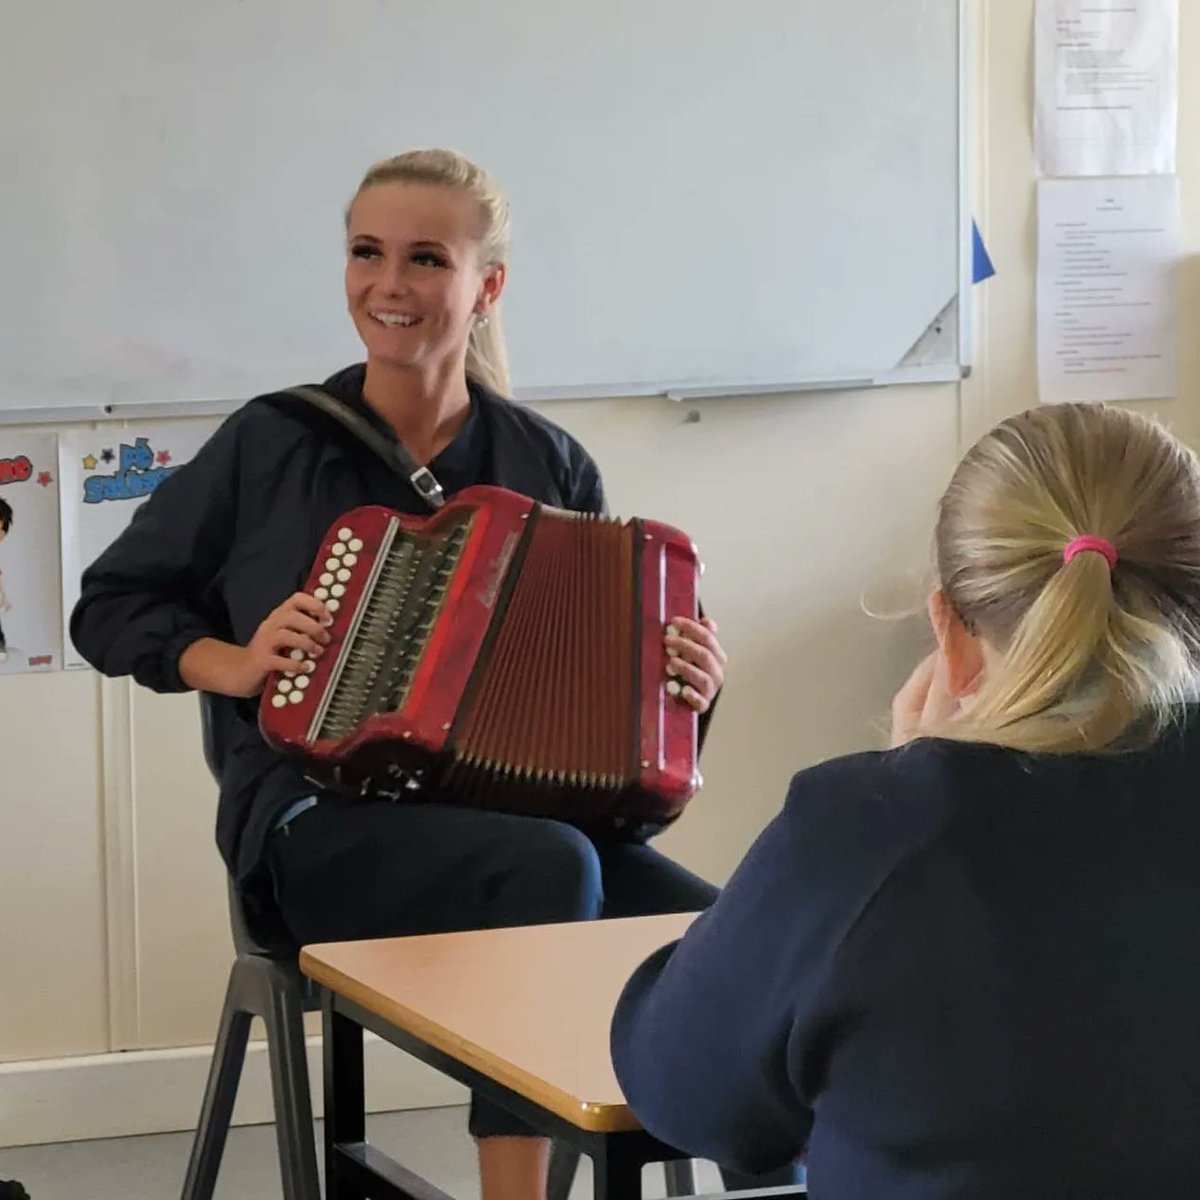 Some of #ASM's Fifth Year Gaeilge students were treated to a 'bosca ceoil' lesson! As they study 'A Thig ná Tit Orm', Maidhc Dainín O Sé's autobiography, Ms Hunt gave the girls a crash course on his beloved accordion. Some of them even had a go! Maith sibh cailíní!